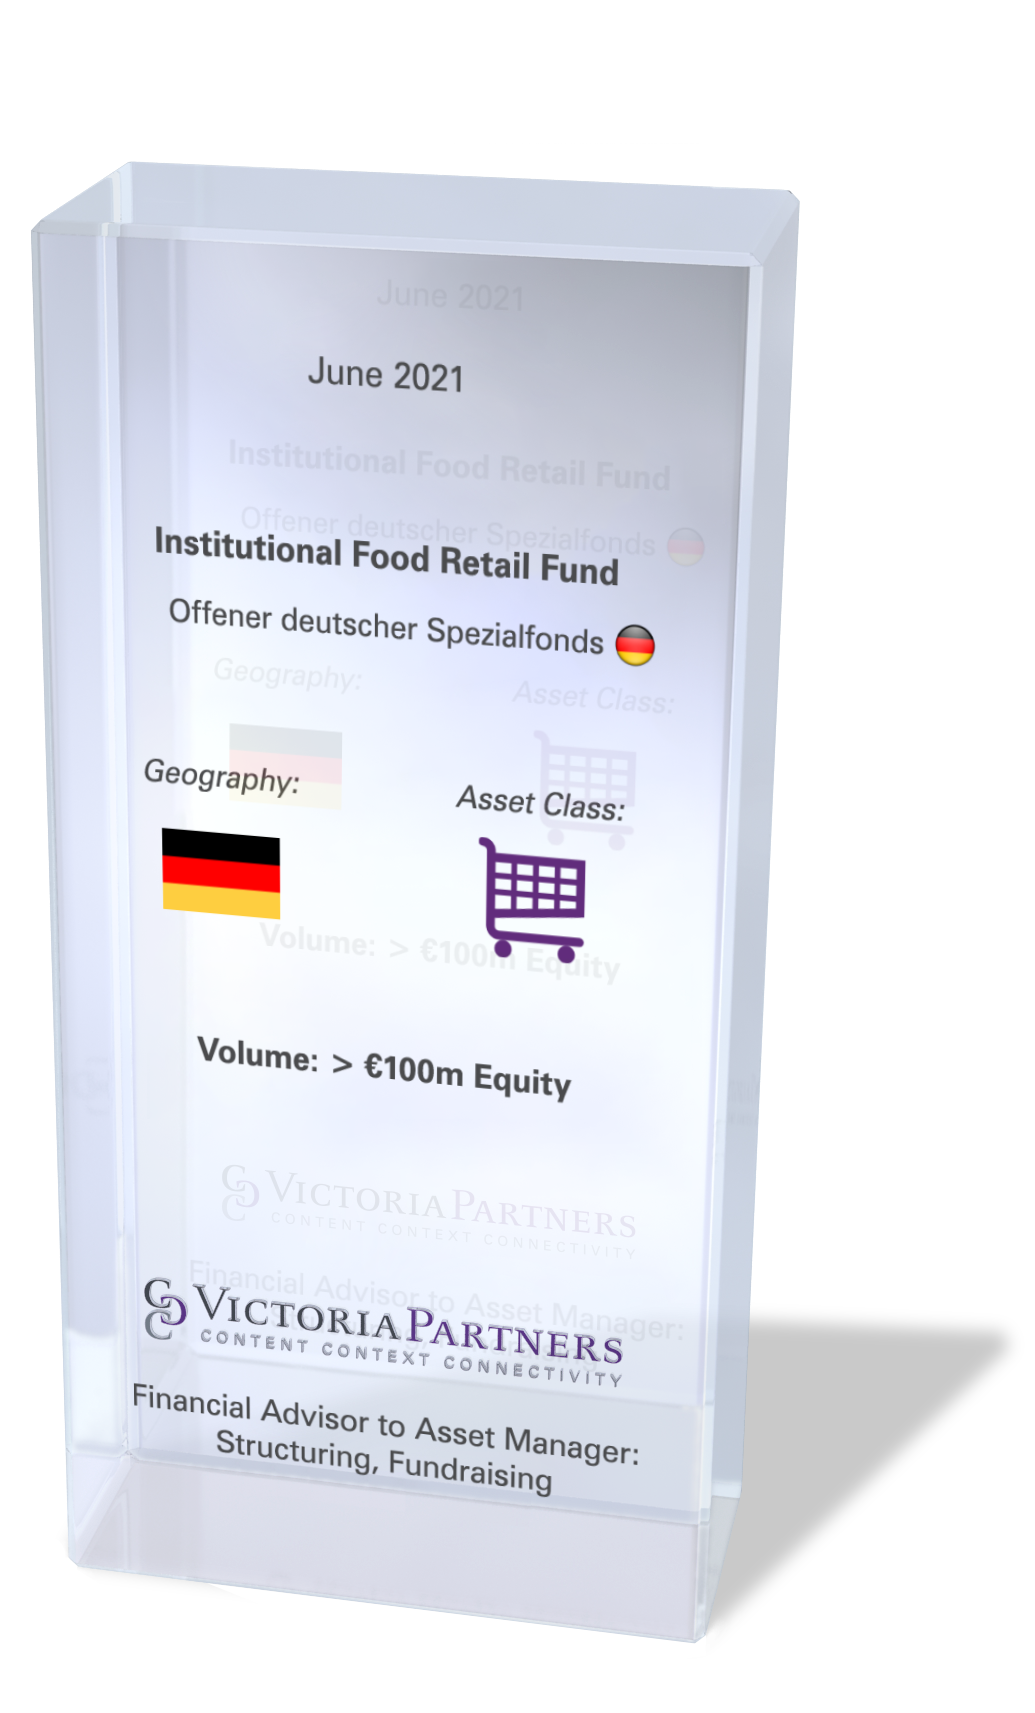 VICTORIAPARTNERS - Financial Advisor to Asset Manager: Structuring, Fundraising in Germany - June 2021